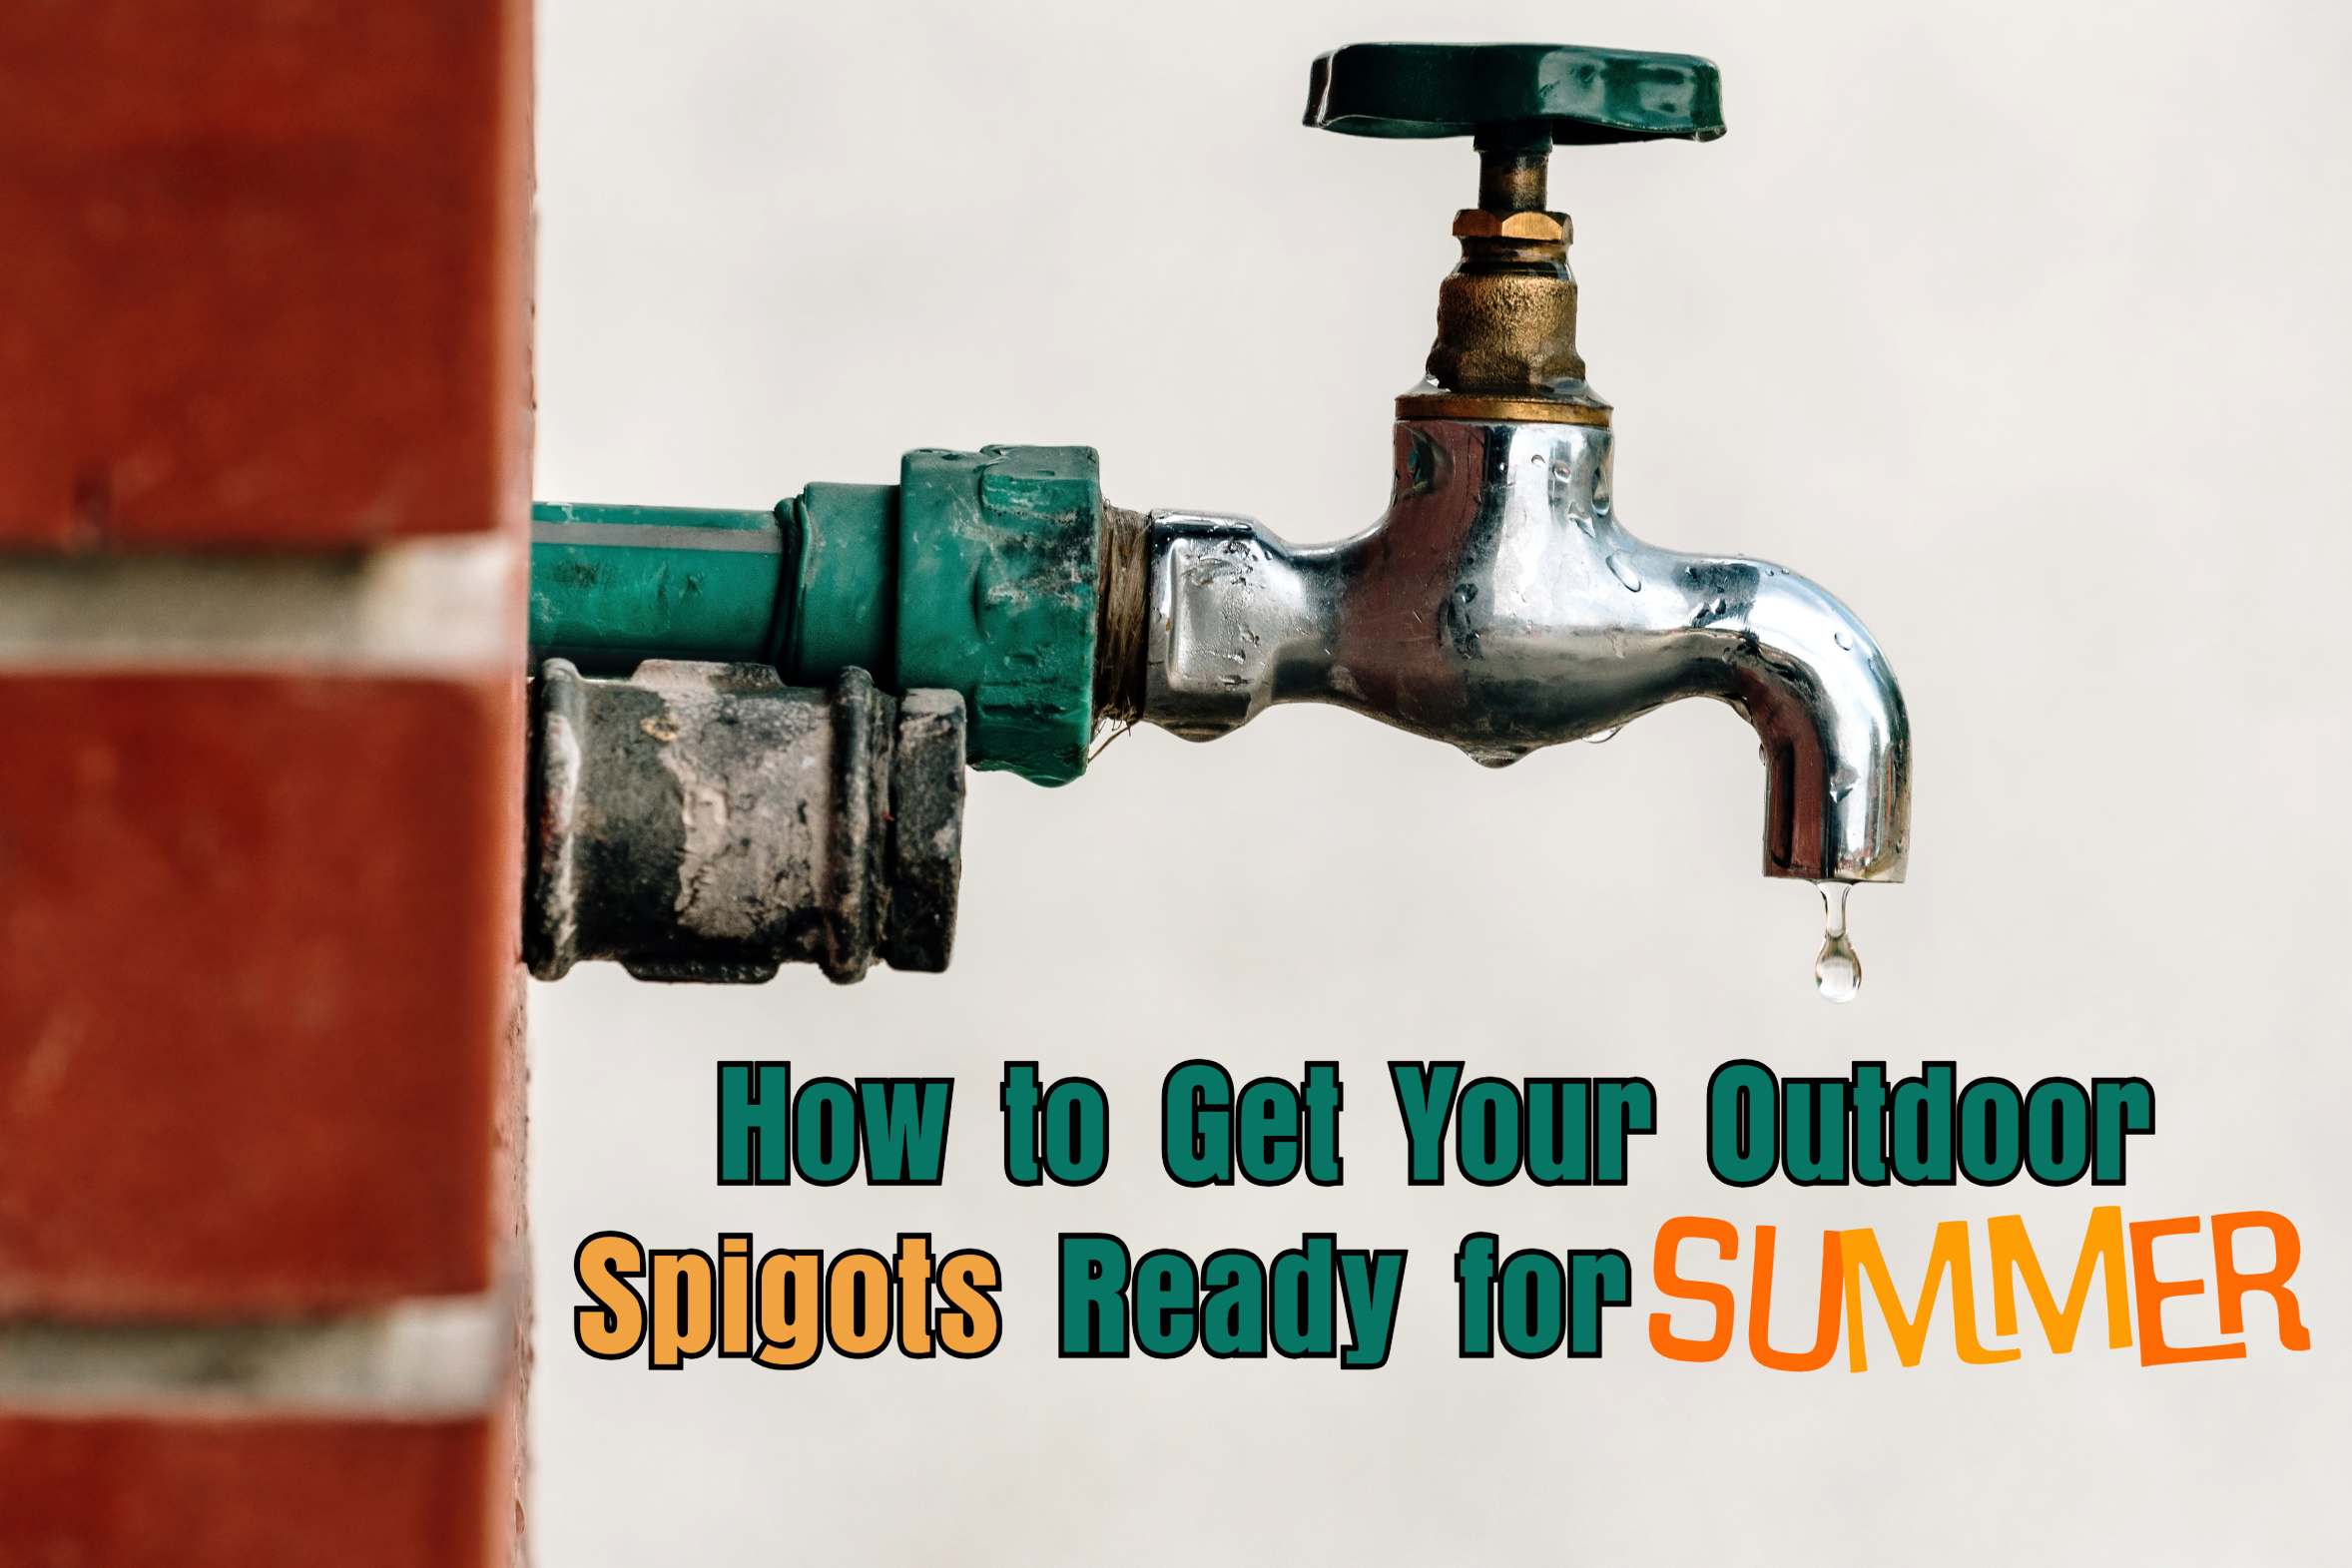 How to Get Your Outdoor Spigots Ready for Summer